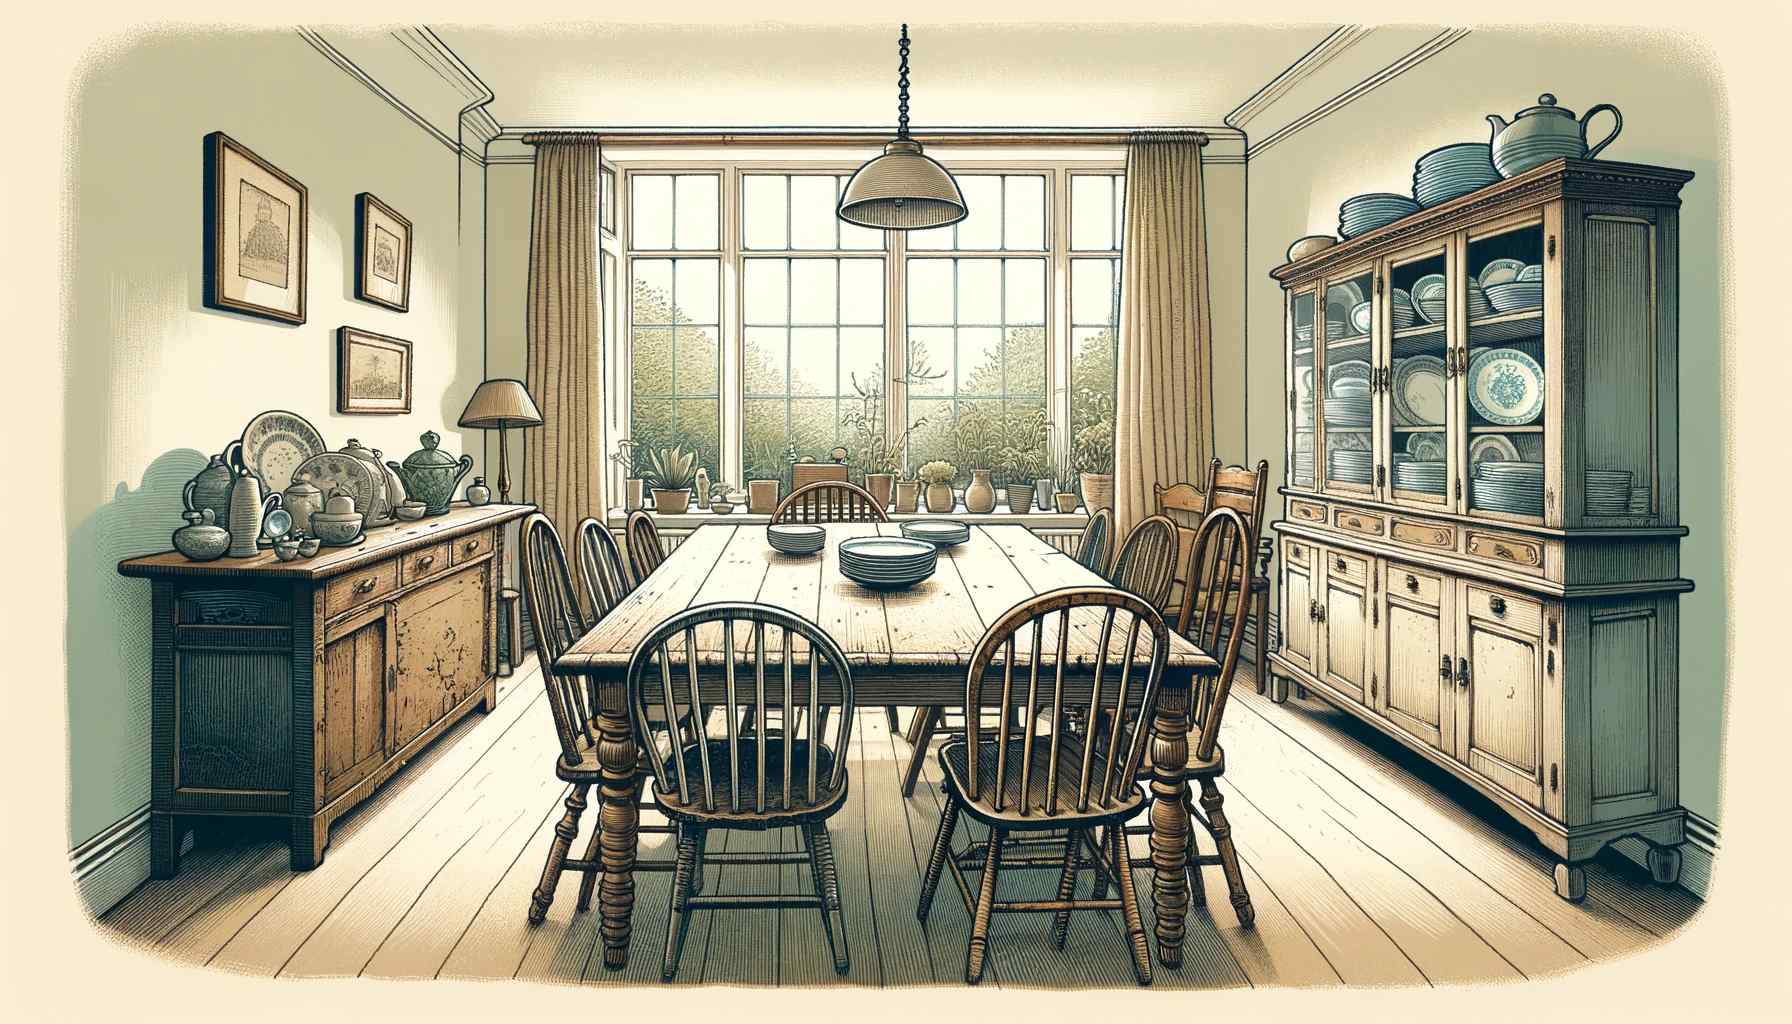 Used Dining Set in the Kitchen